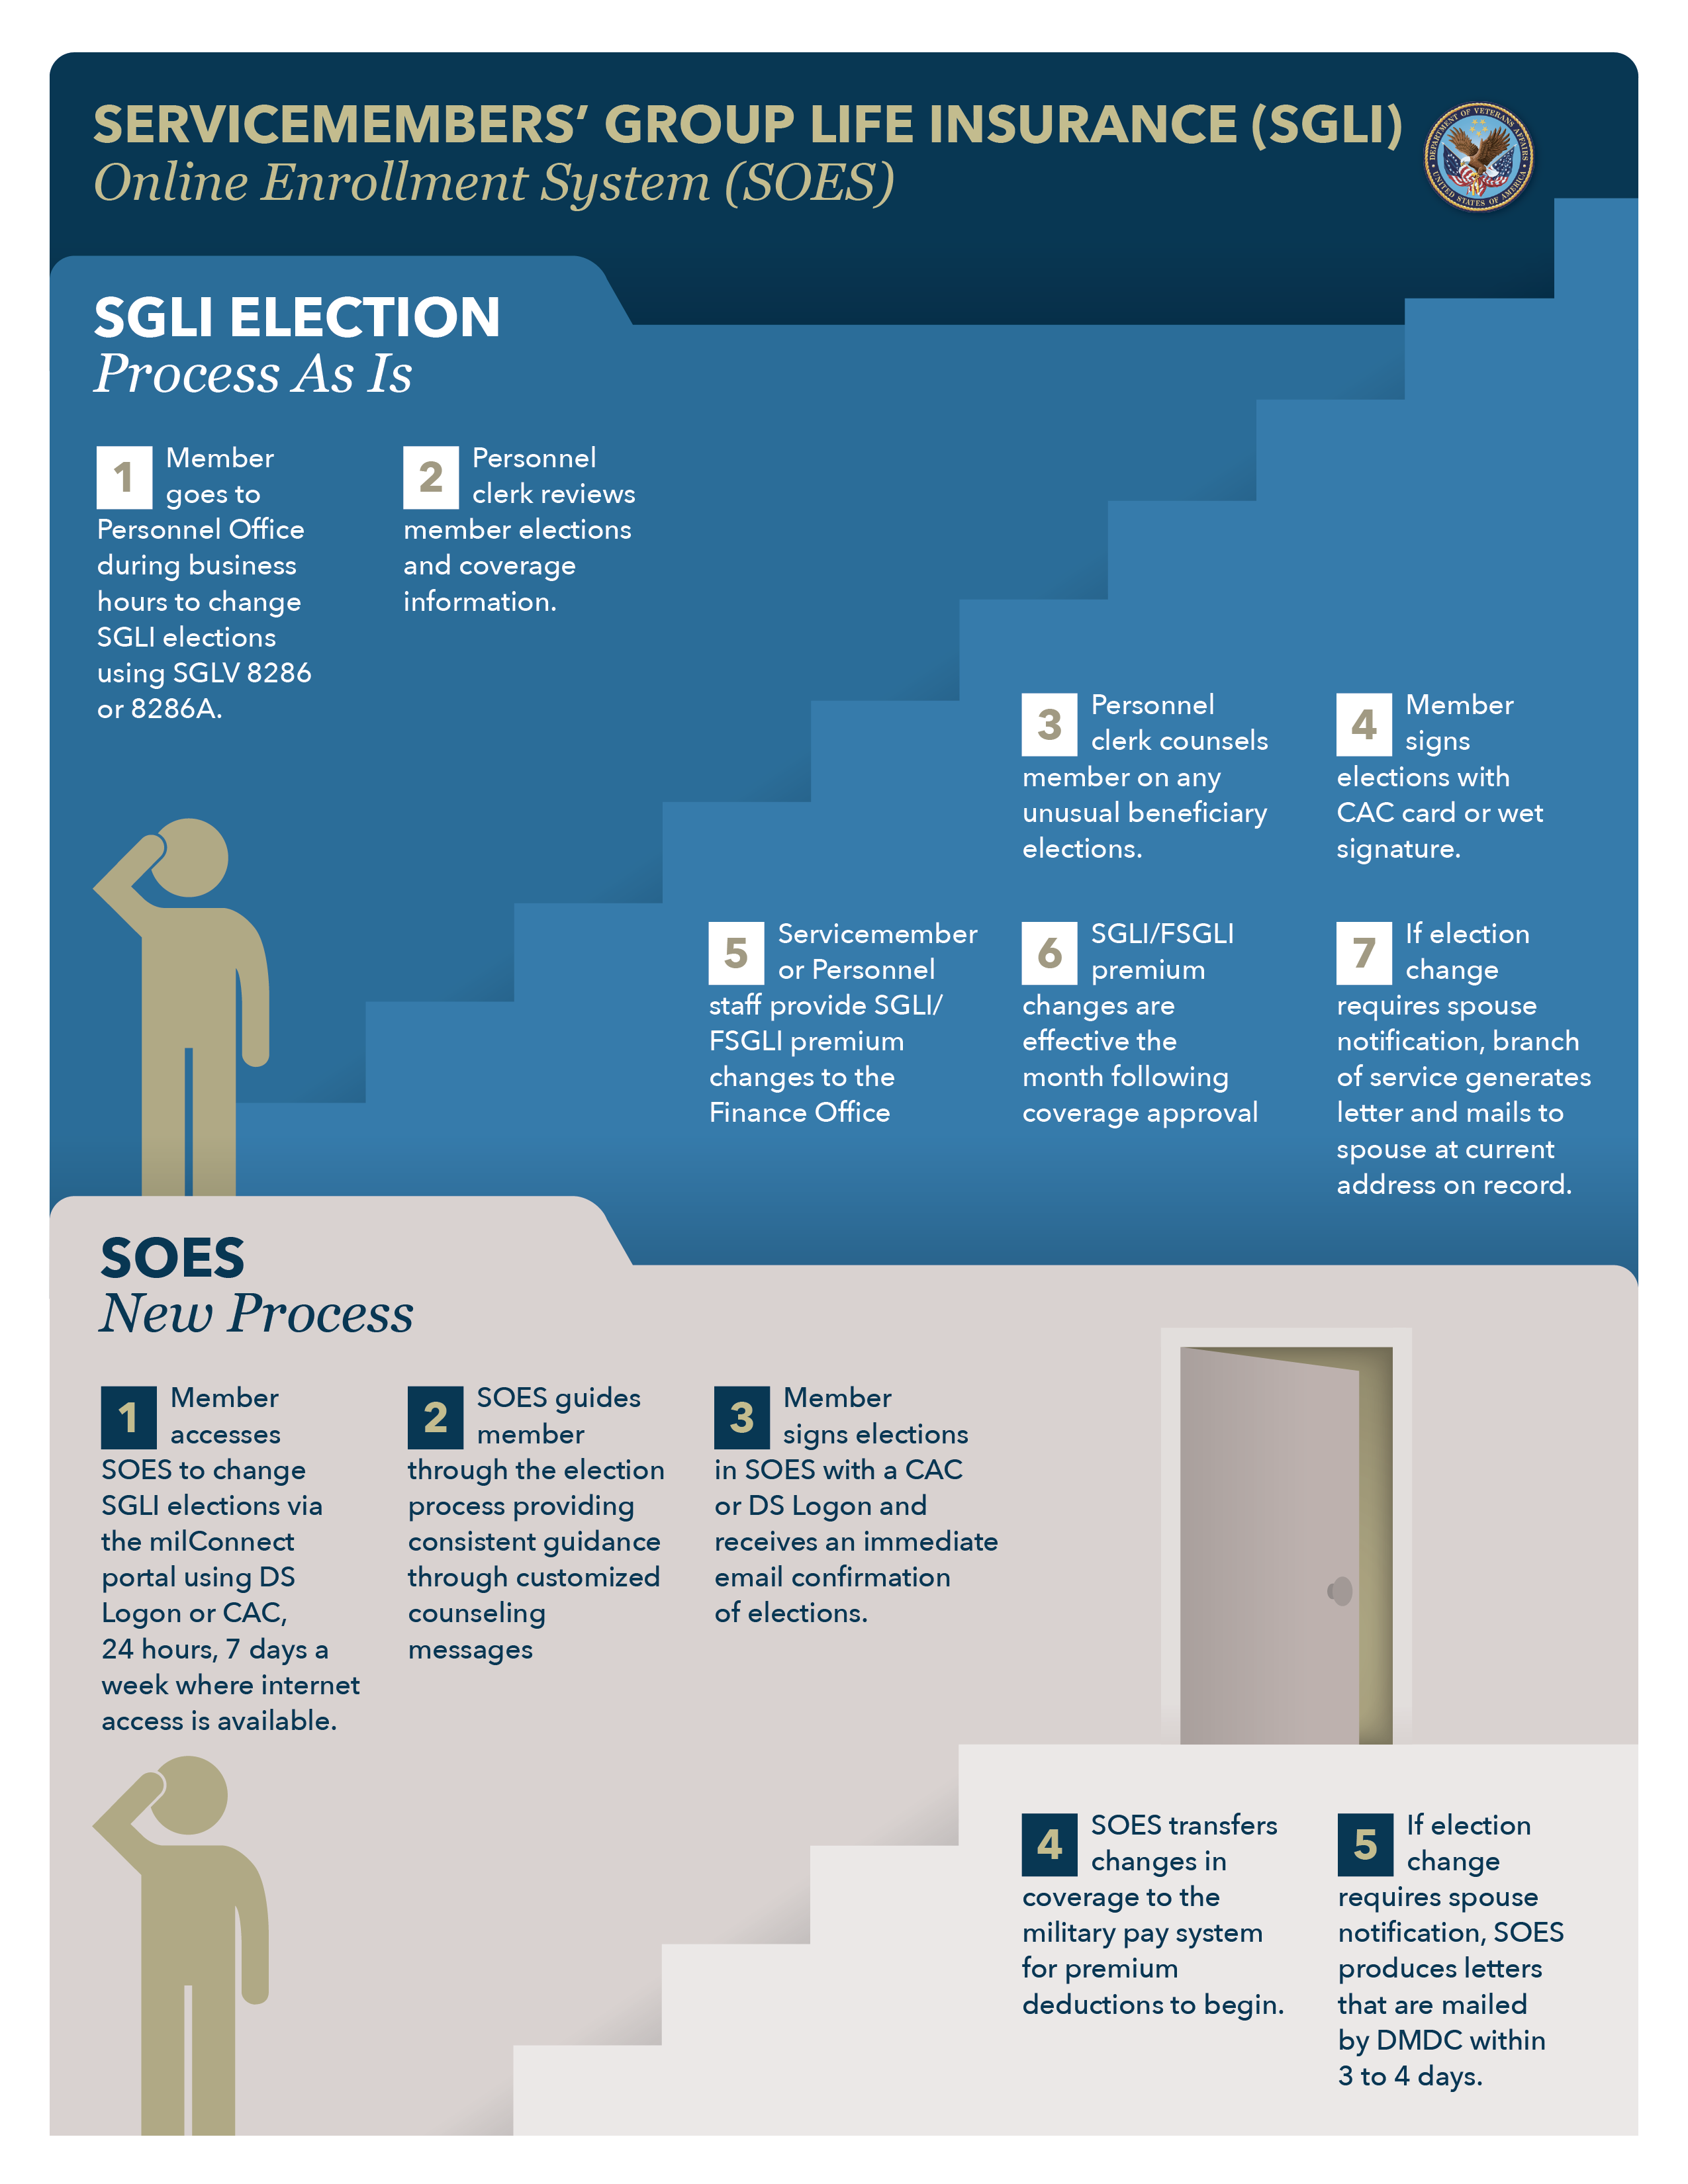 Follow this link for an easy to understand picture of the SGLI election process before and after SOES implementation